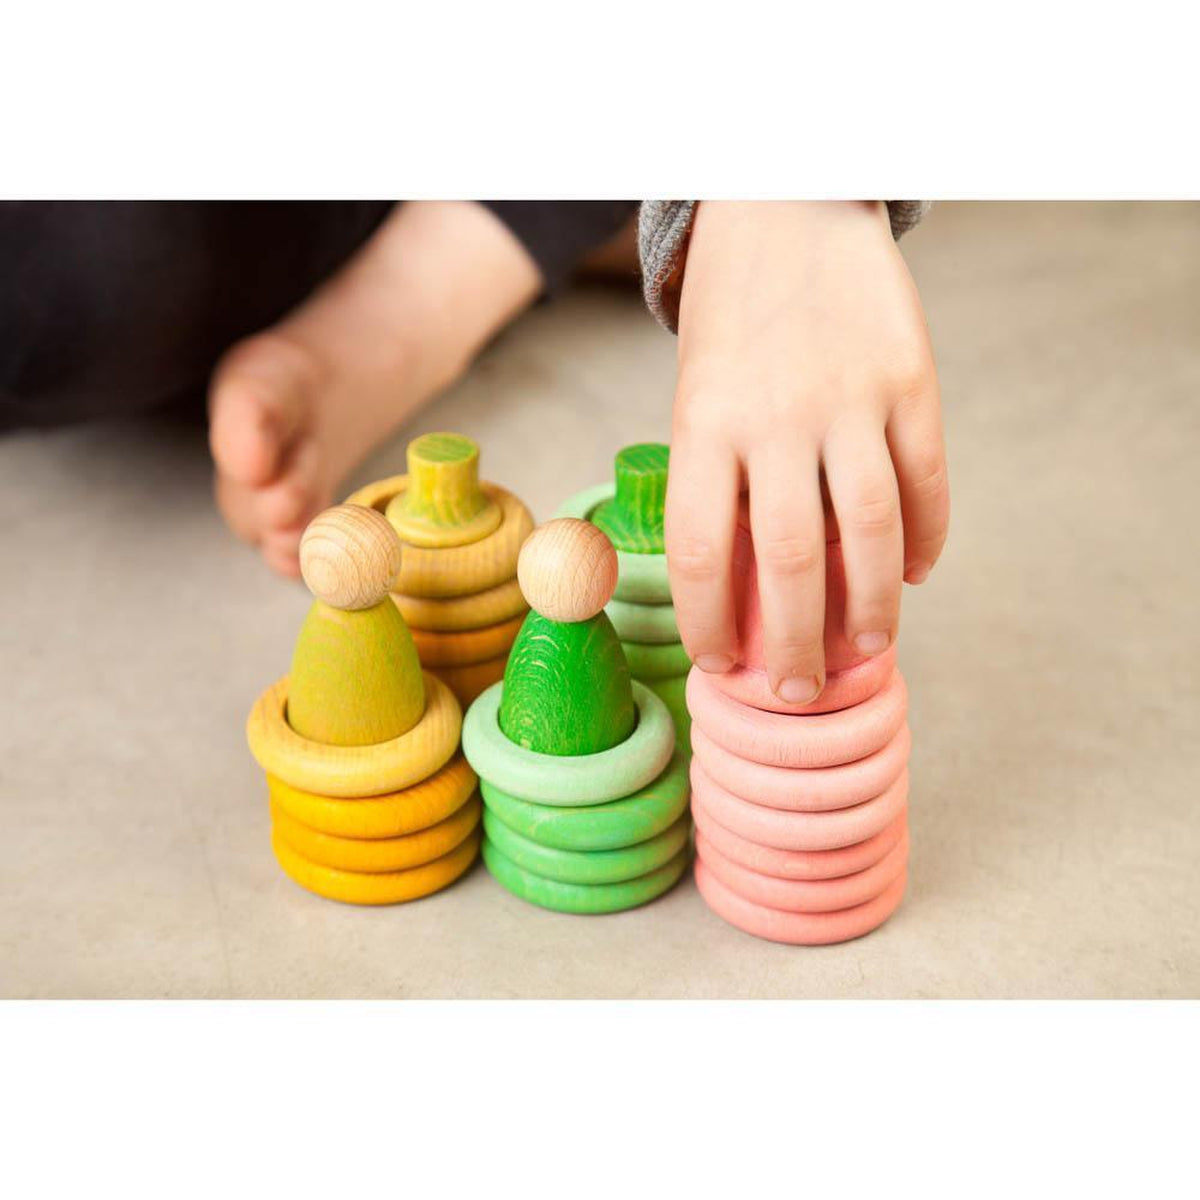 Grapat spring wood nins, mates, rings, and coins-blocks & building sets-Fire the Imagination-Dilly Dally Kids